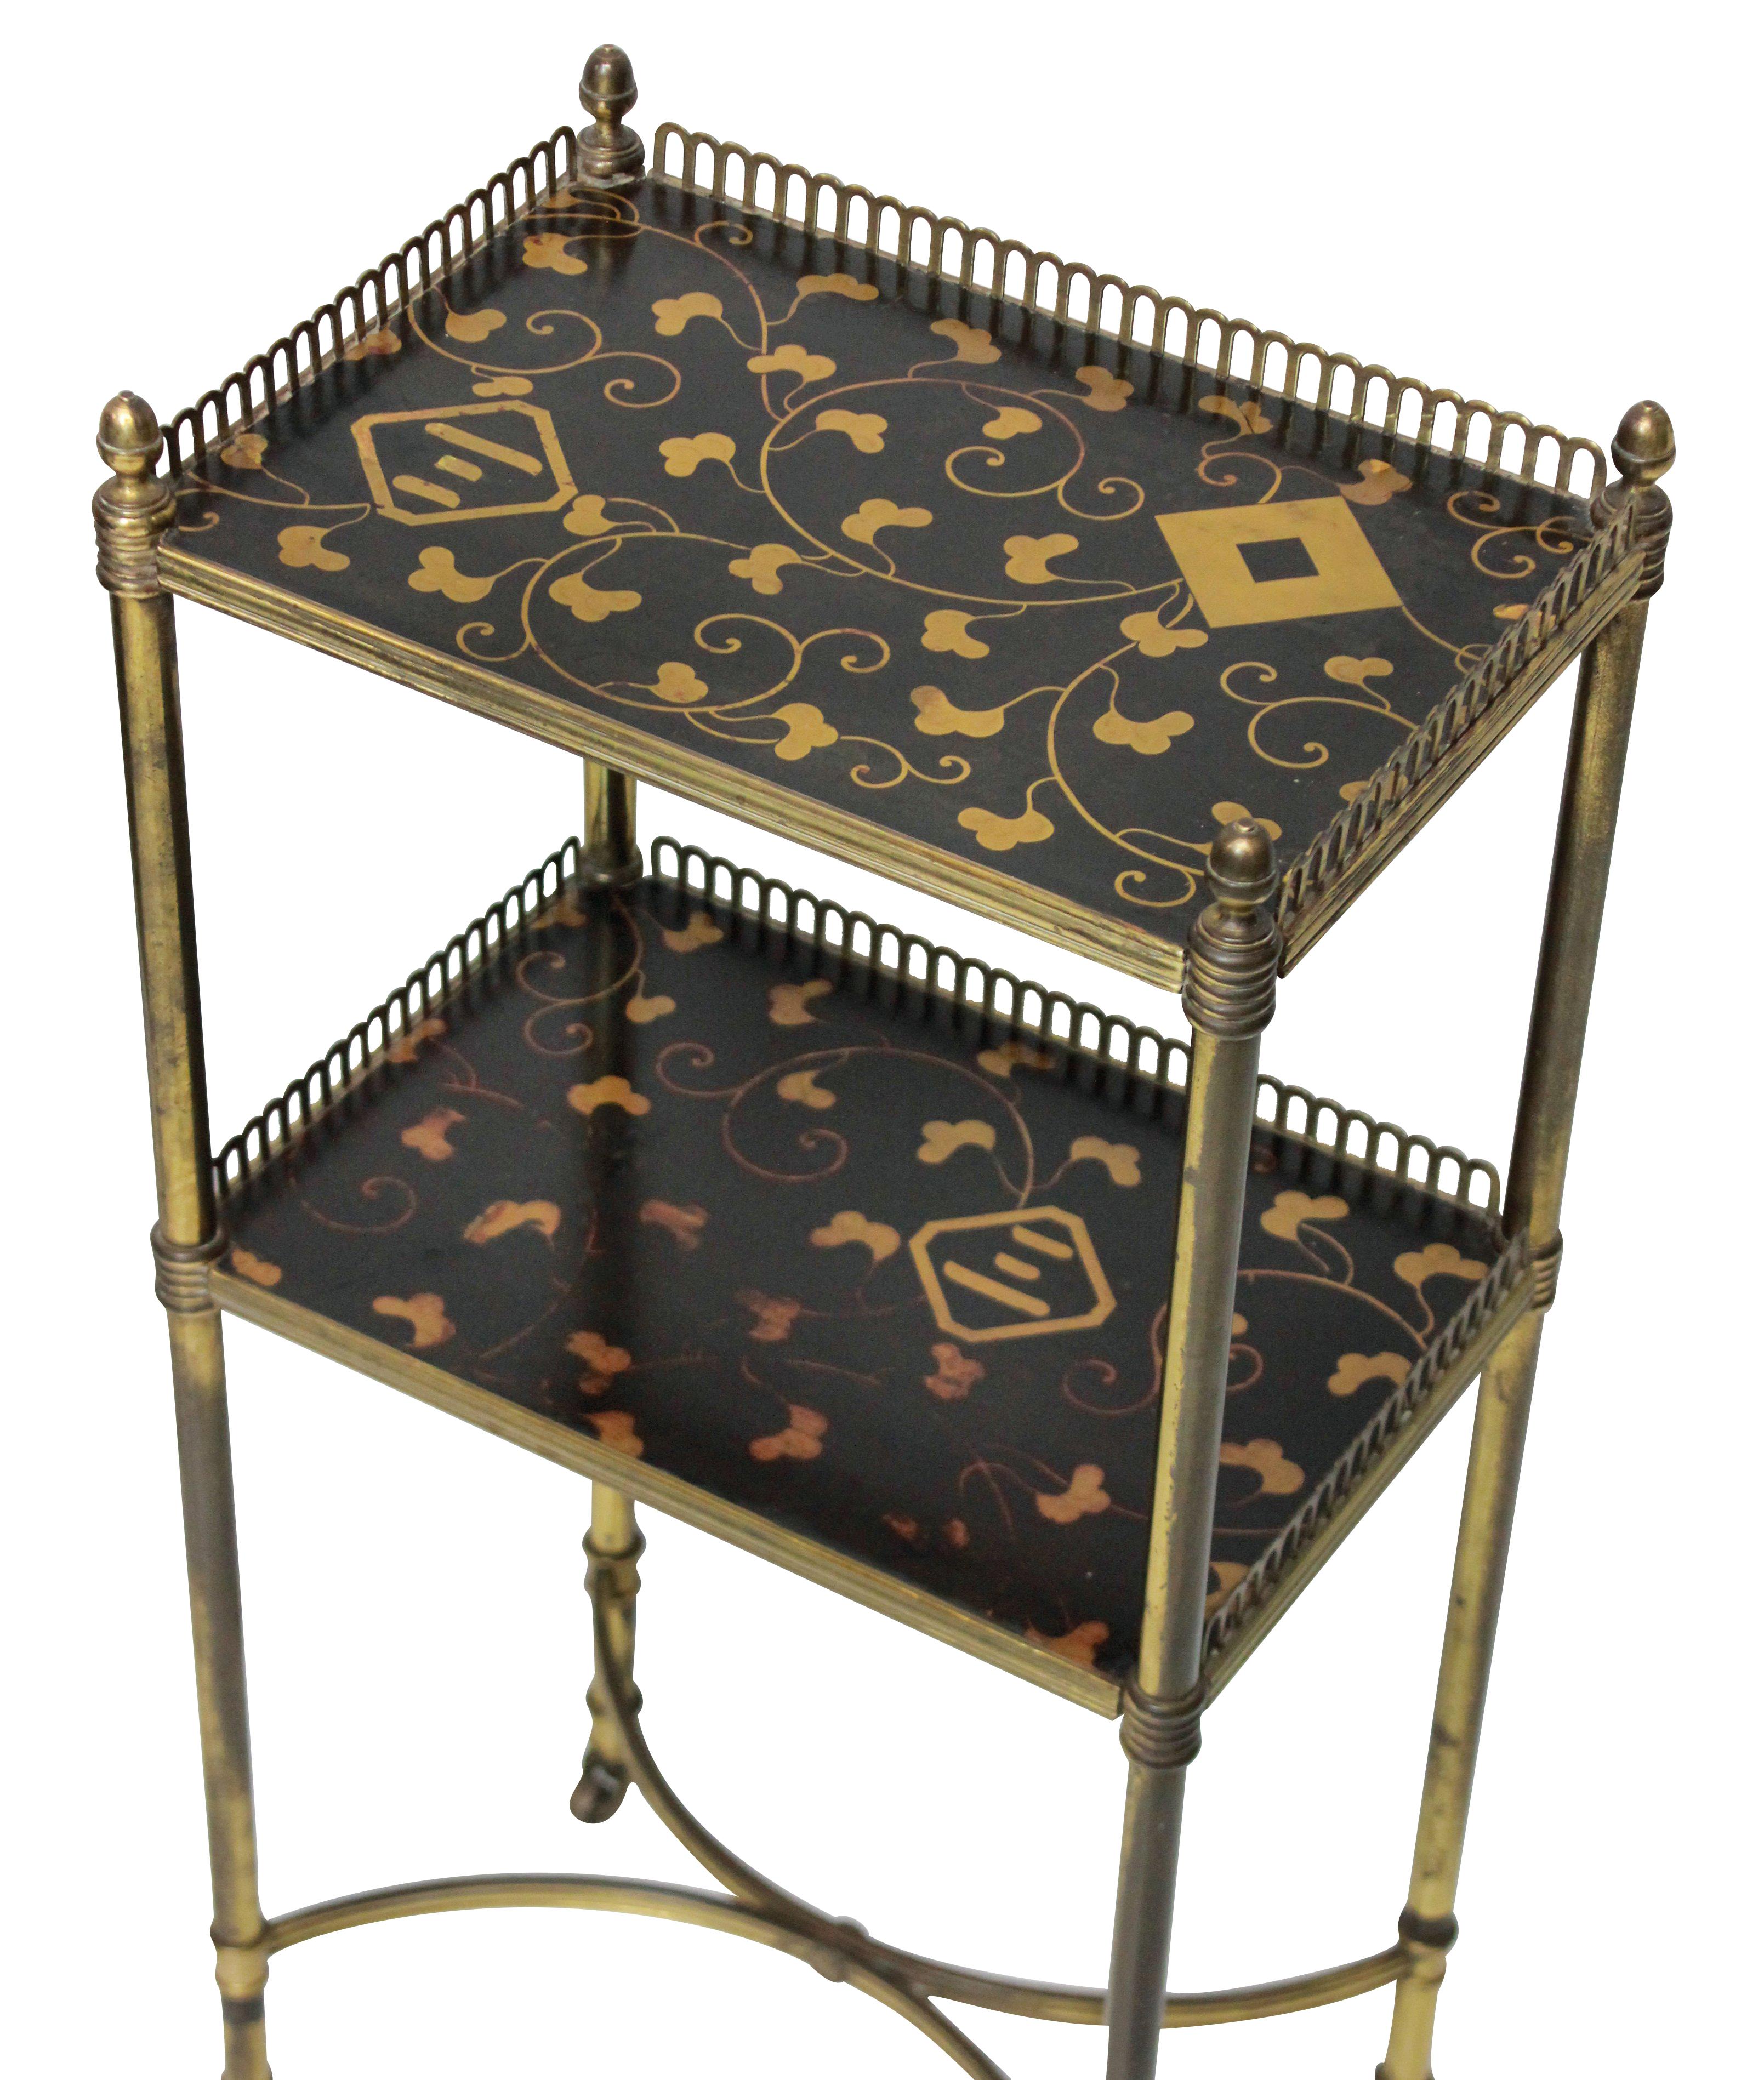 A pair of Mallett's of bond street étagère wine tables, with lacquered oriental designs with brass galleries and legs.

 